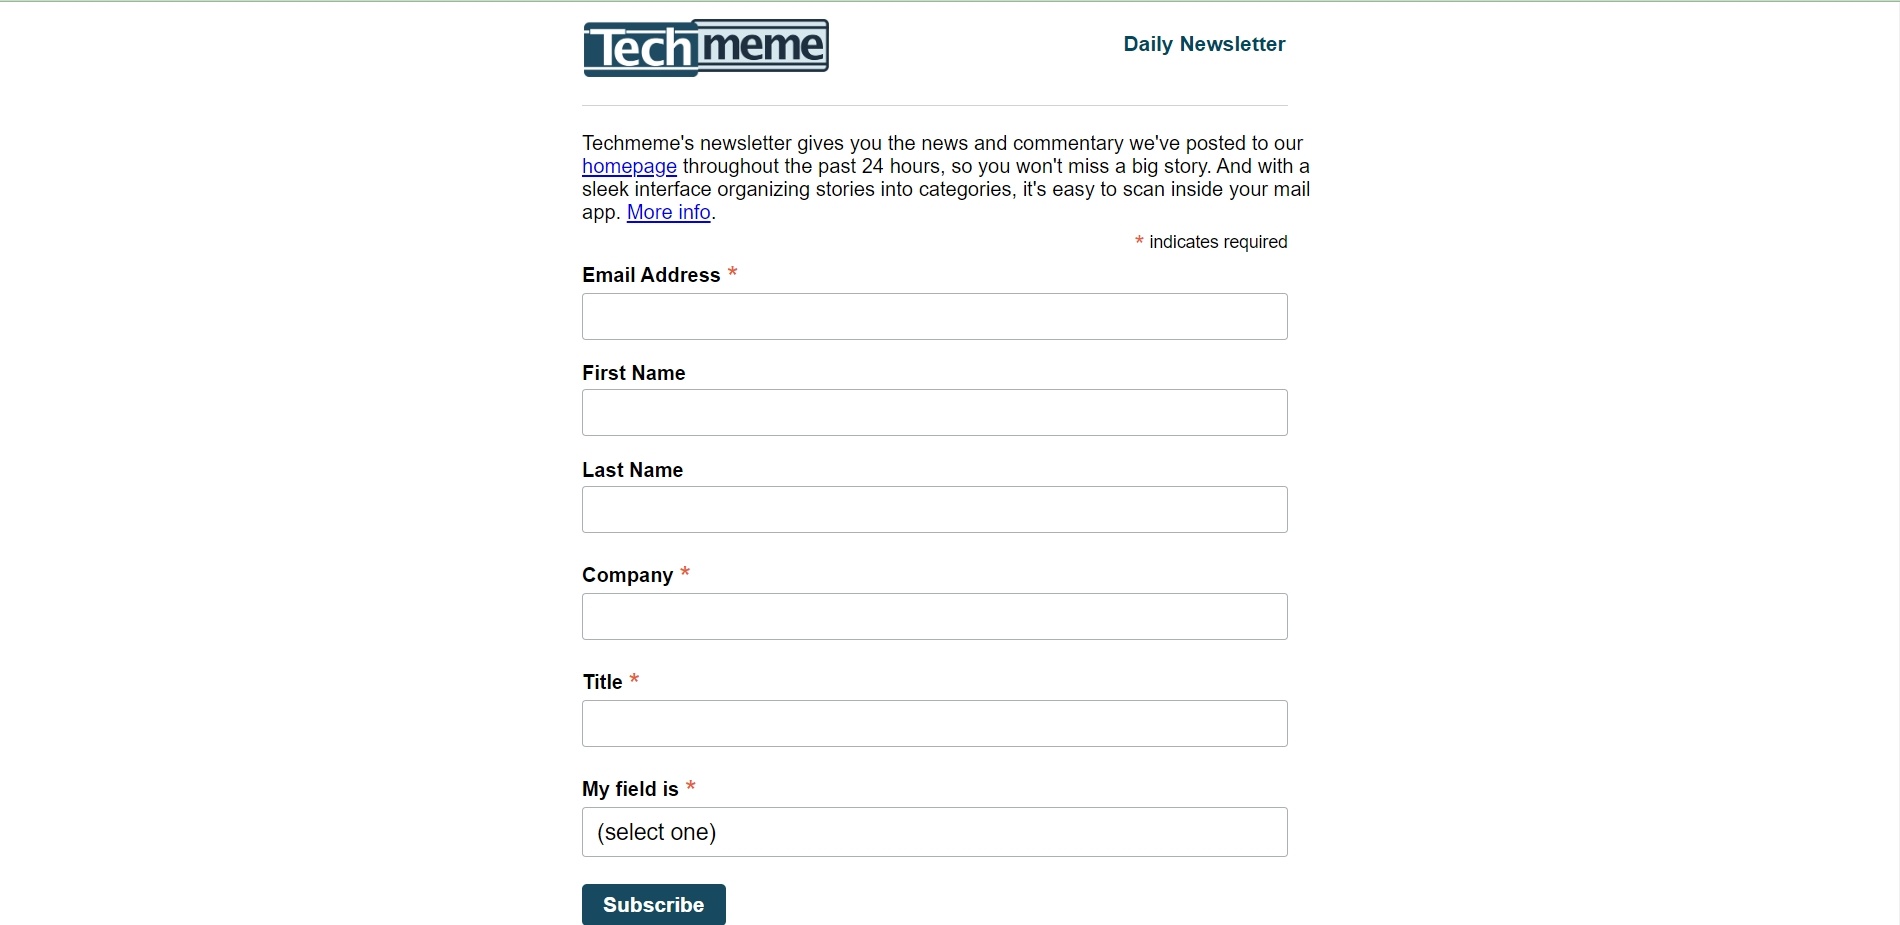 Techmeme’s email sign up offer is a good example of a longer form used for a newsletter subscription 